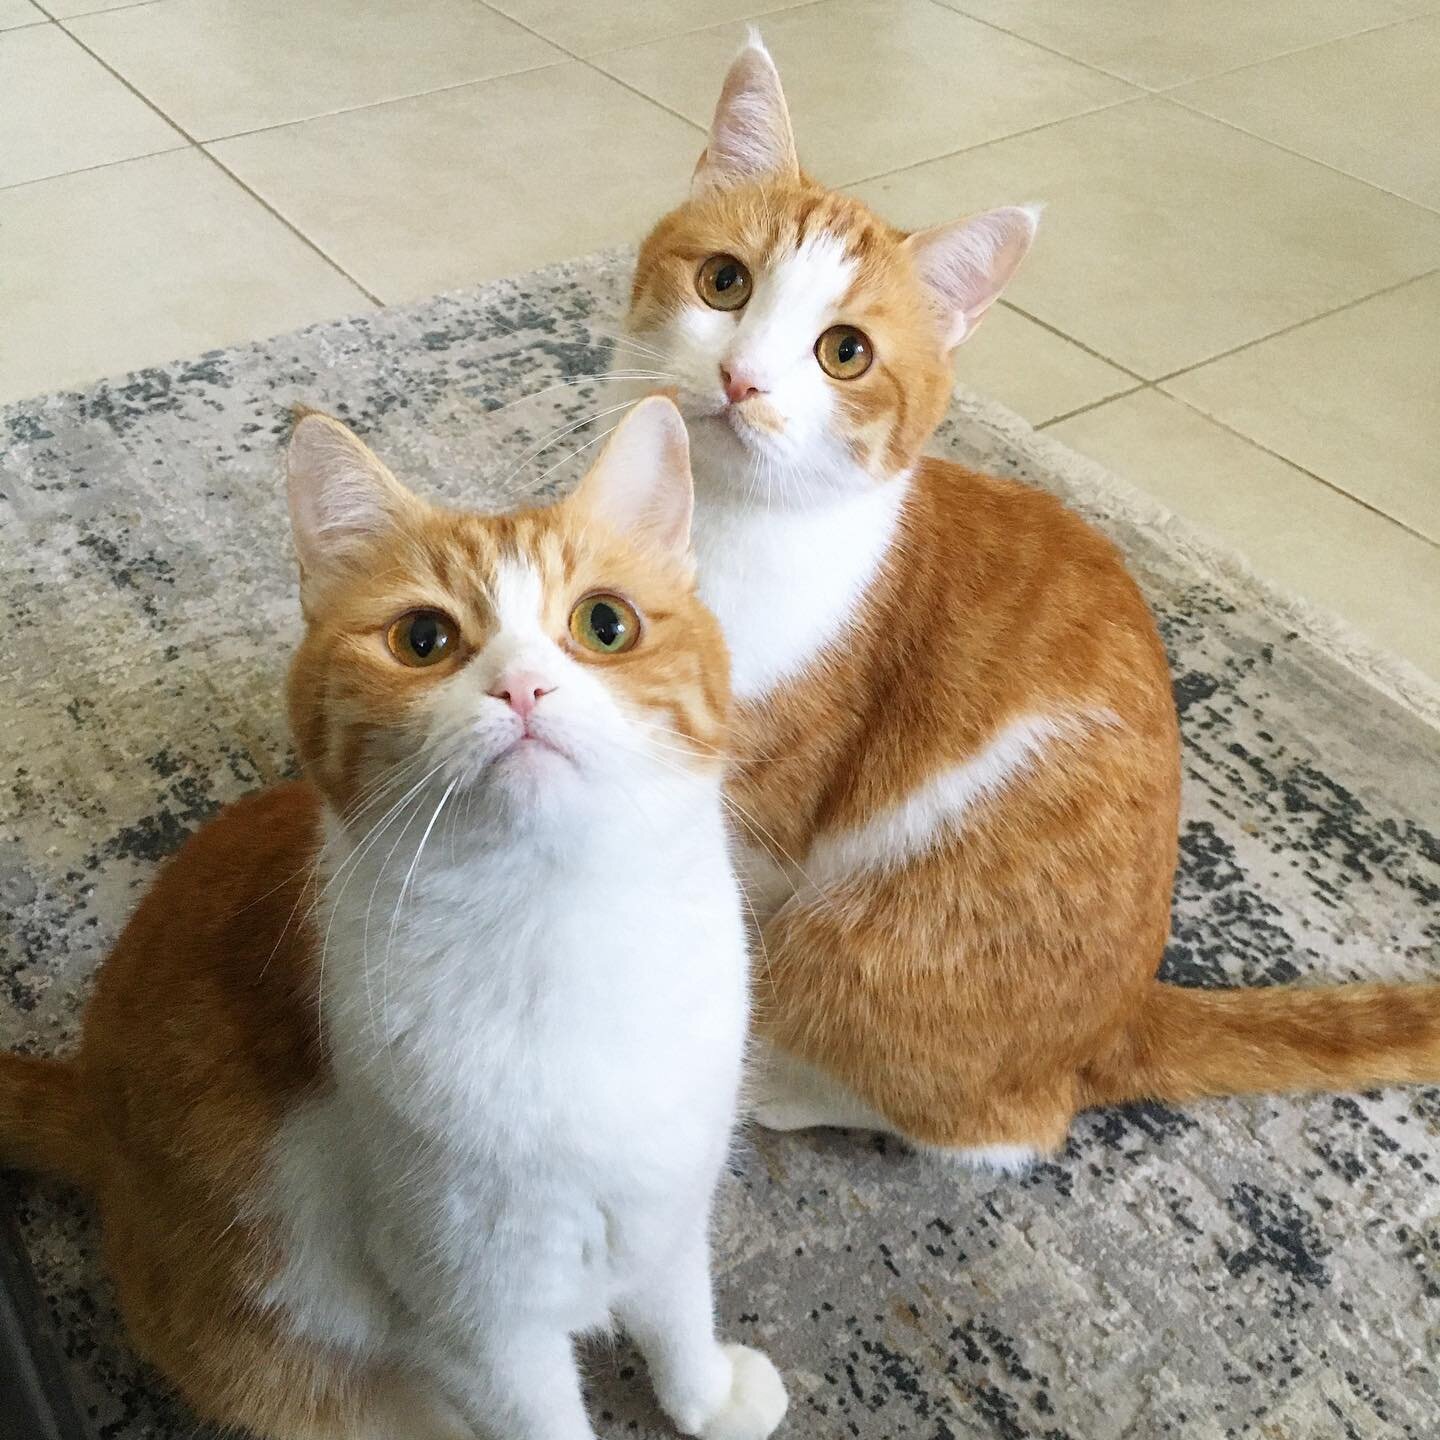 Cati and Mausi looking like butter wouldn&rsquo;t melt&hellip; (emptied plant pot out of shot) #gingercat #rescueismyfavoritebreed #rescuecats #siblings #gingerandwhitecat #catsofinstagram #dubaicats #catsindubai